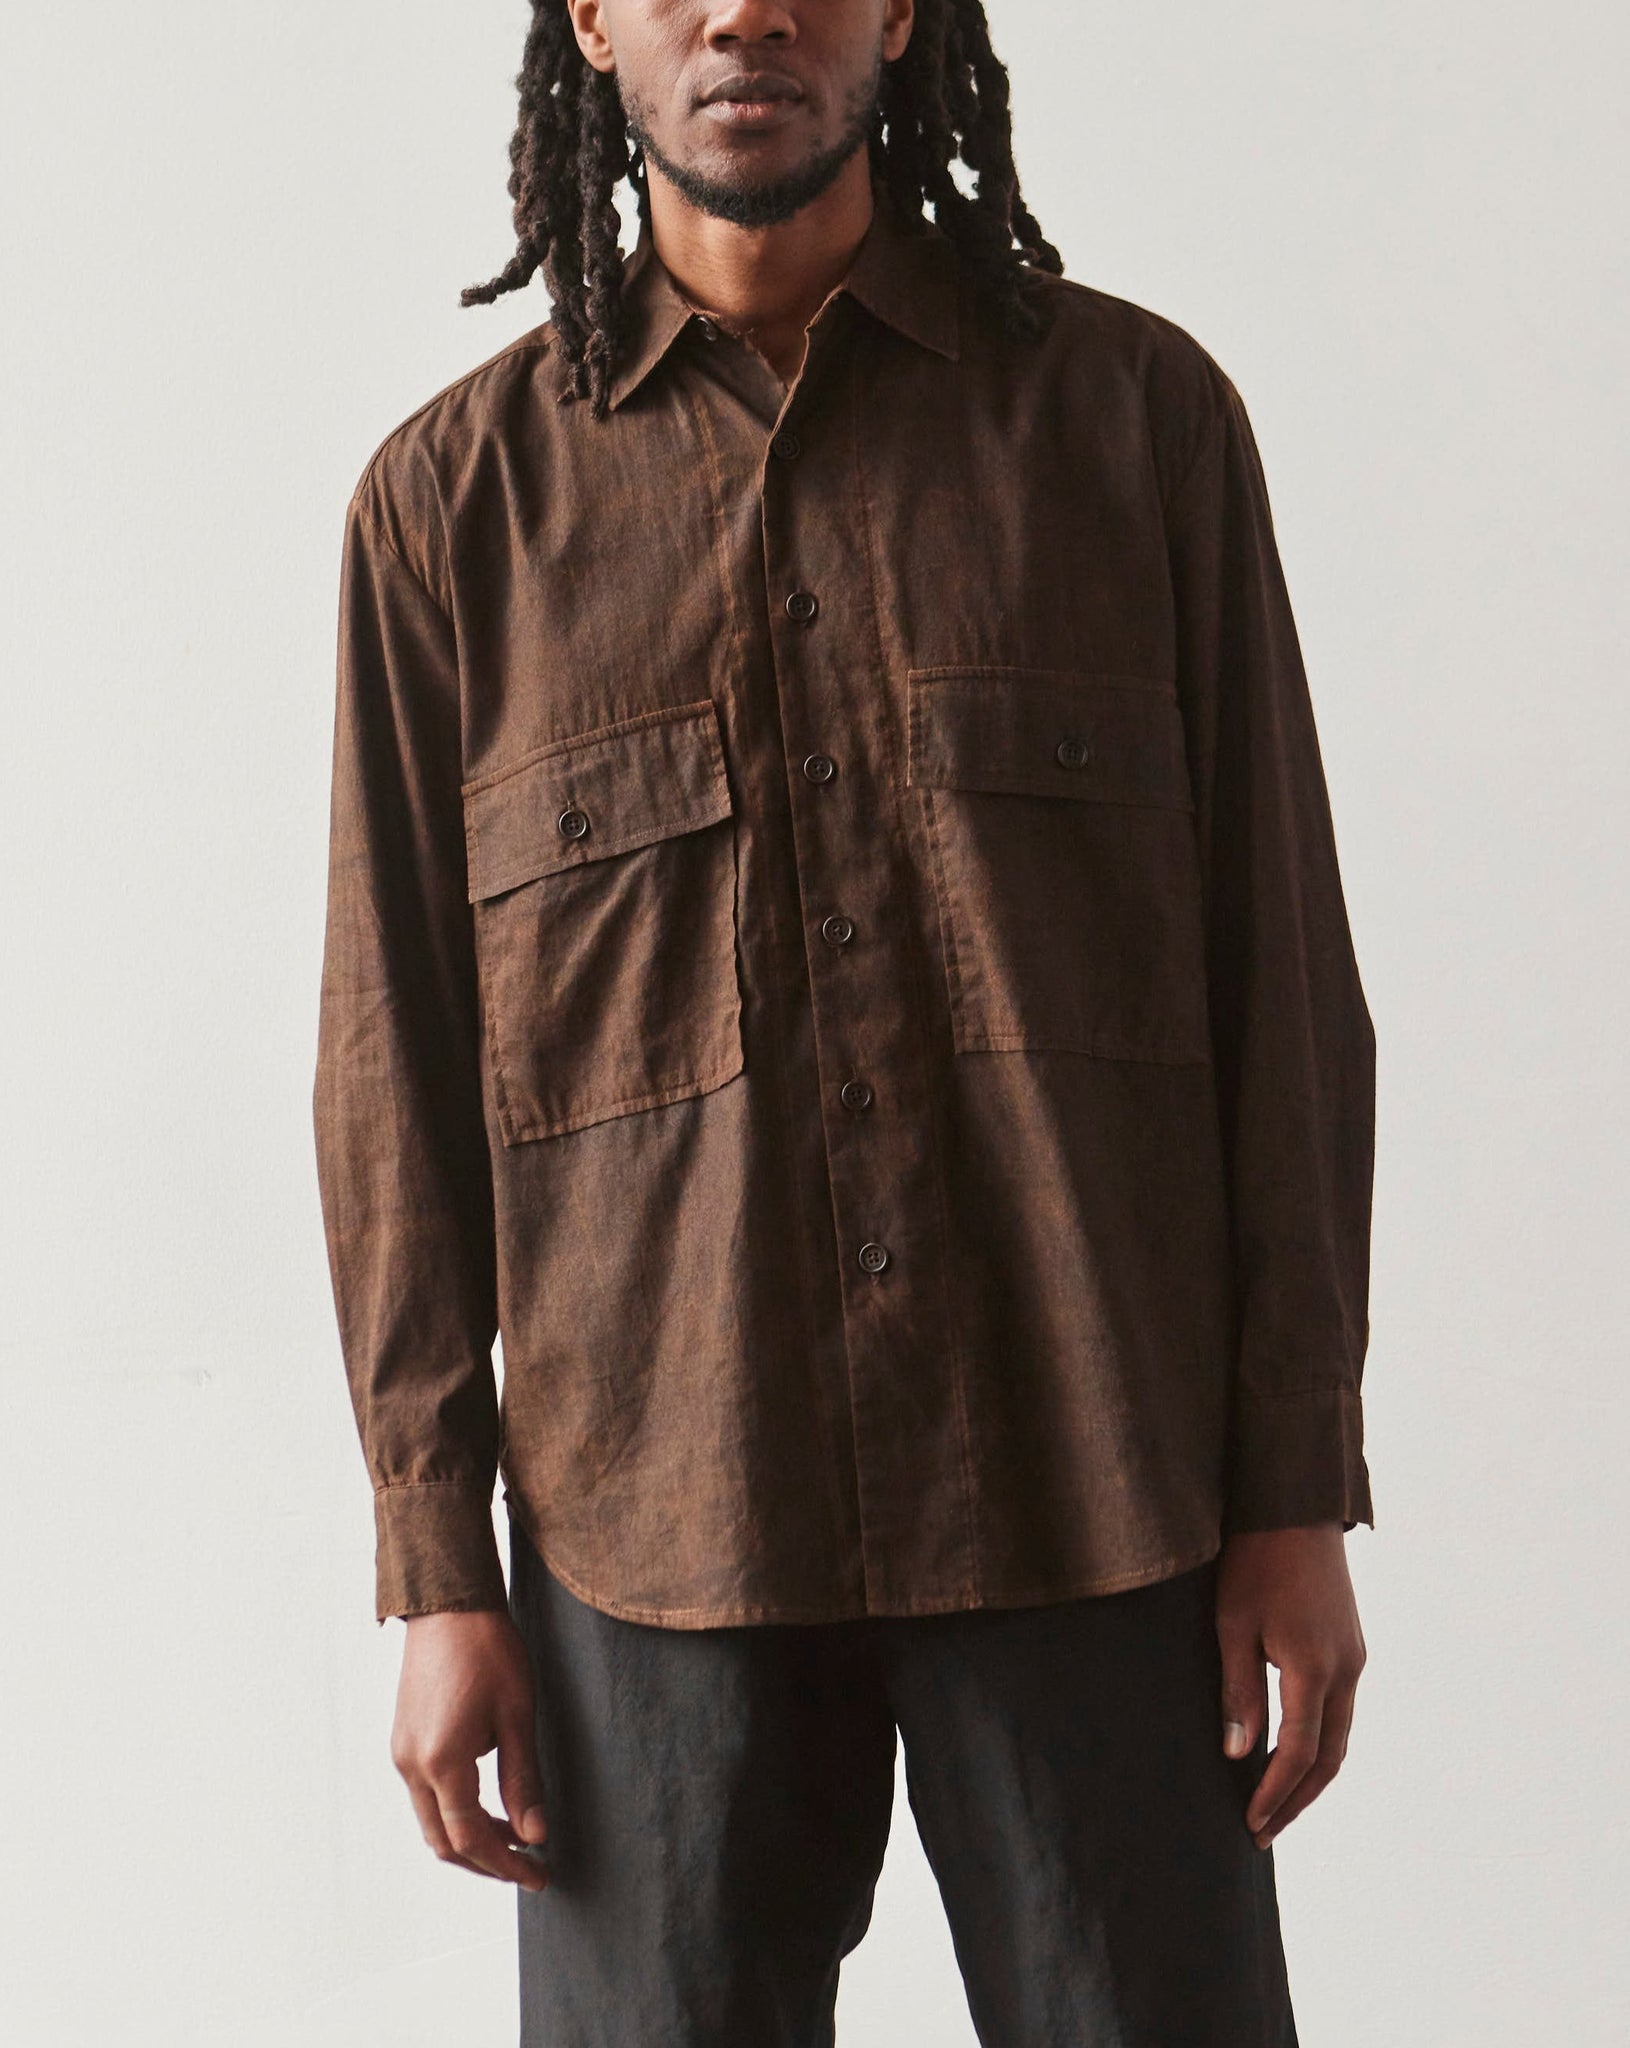 Button Down Shirt with Pockets and Strong Shoulders.